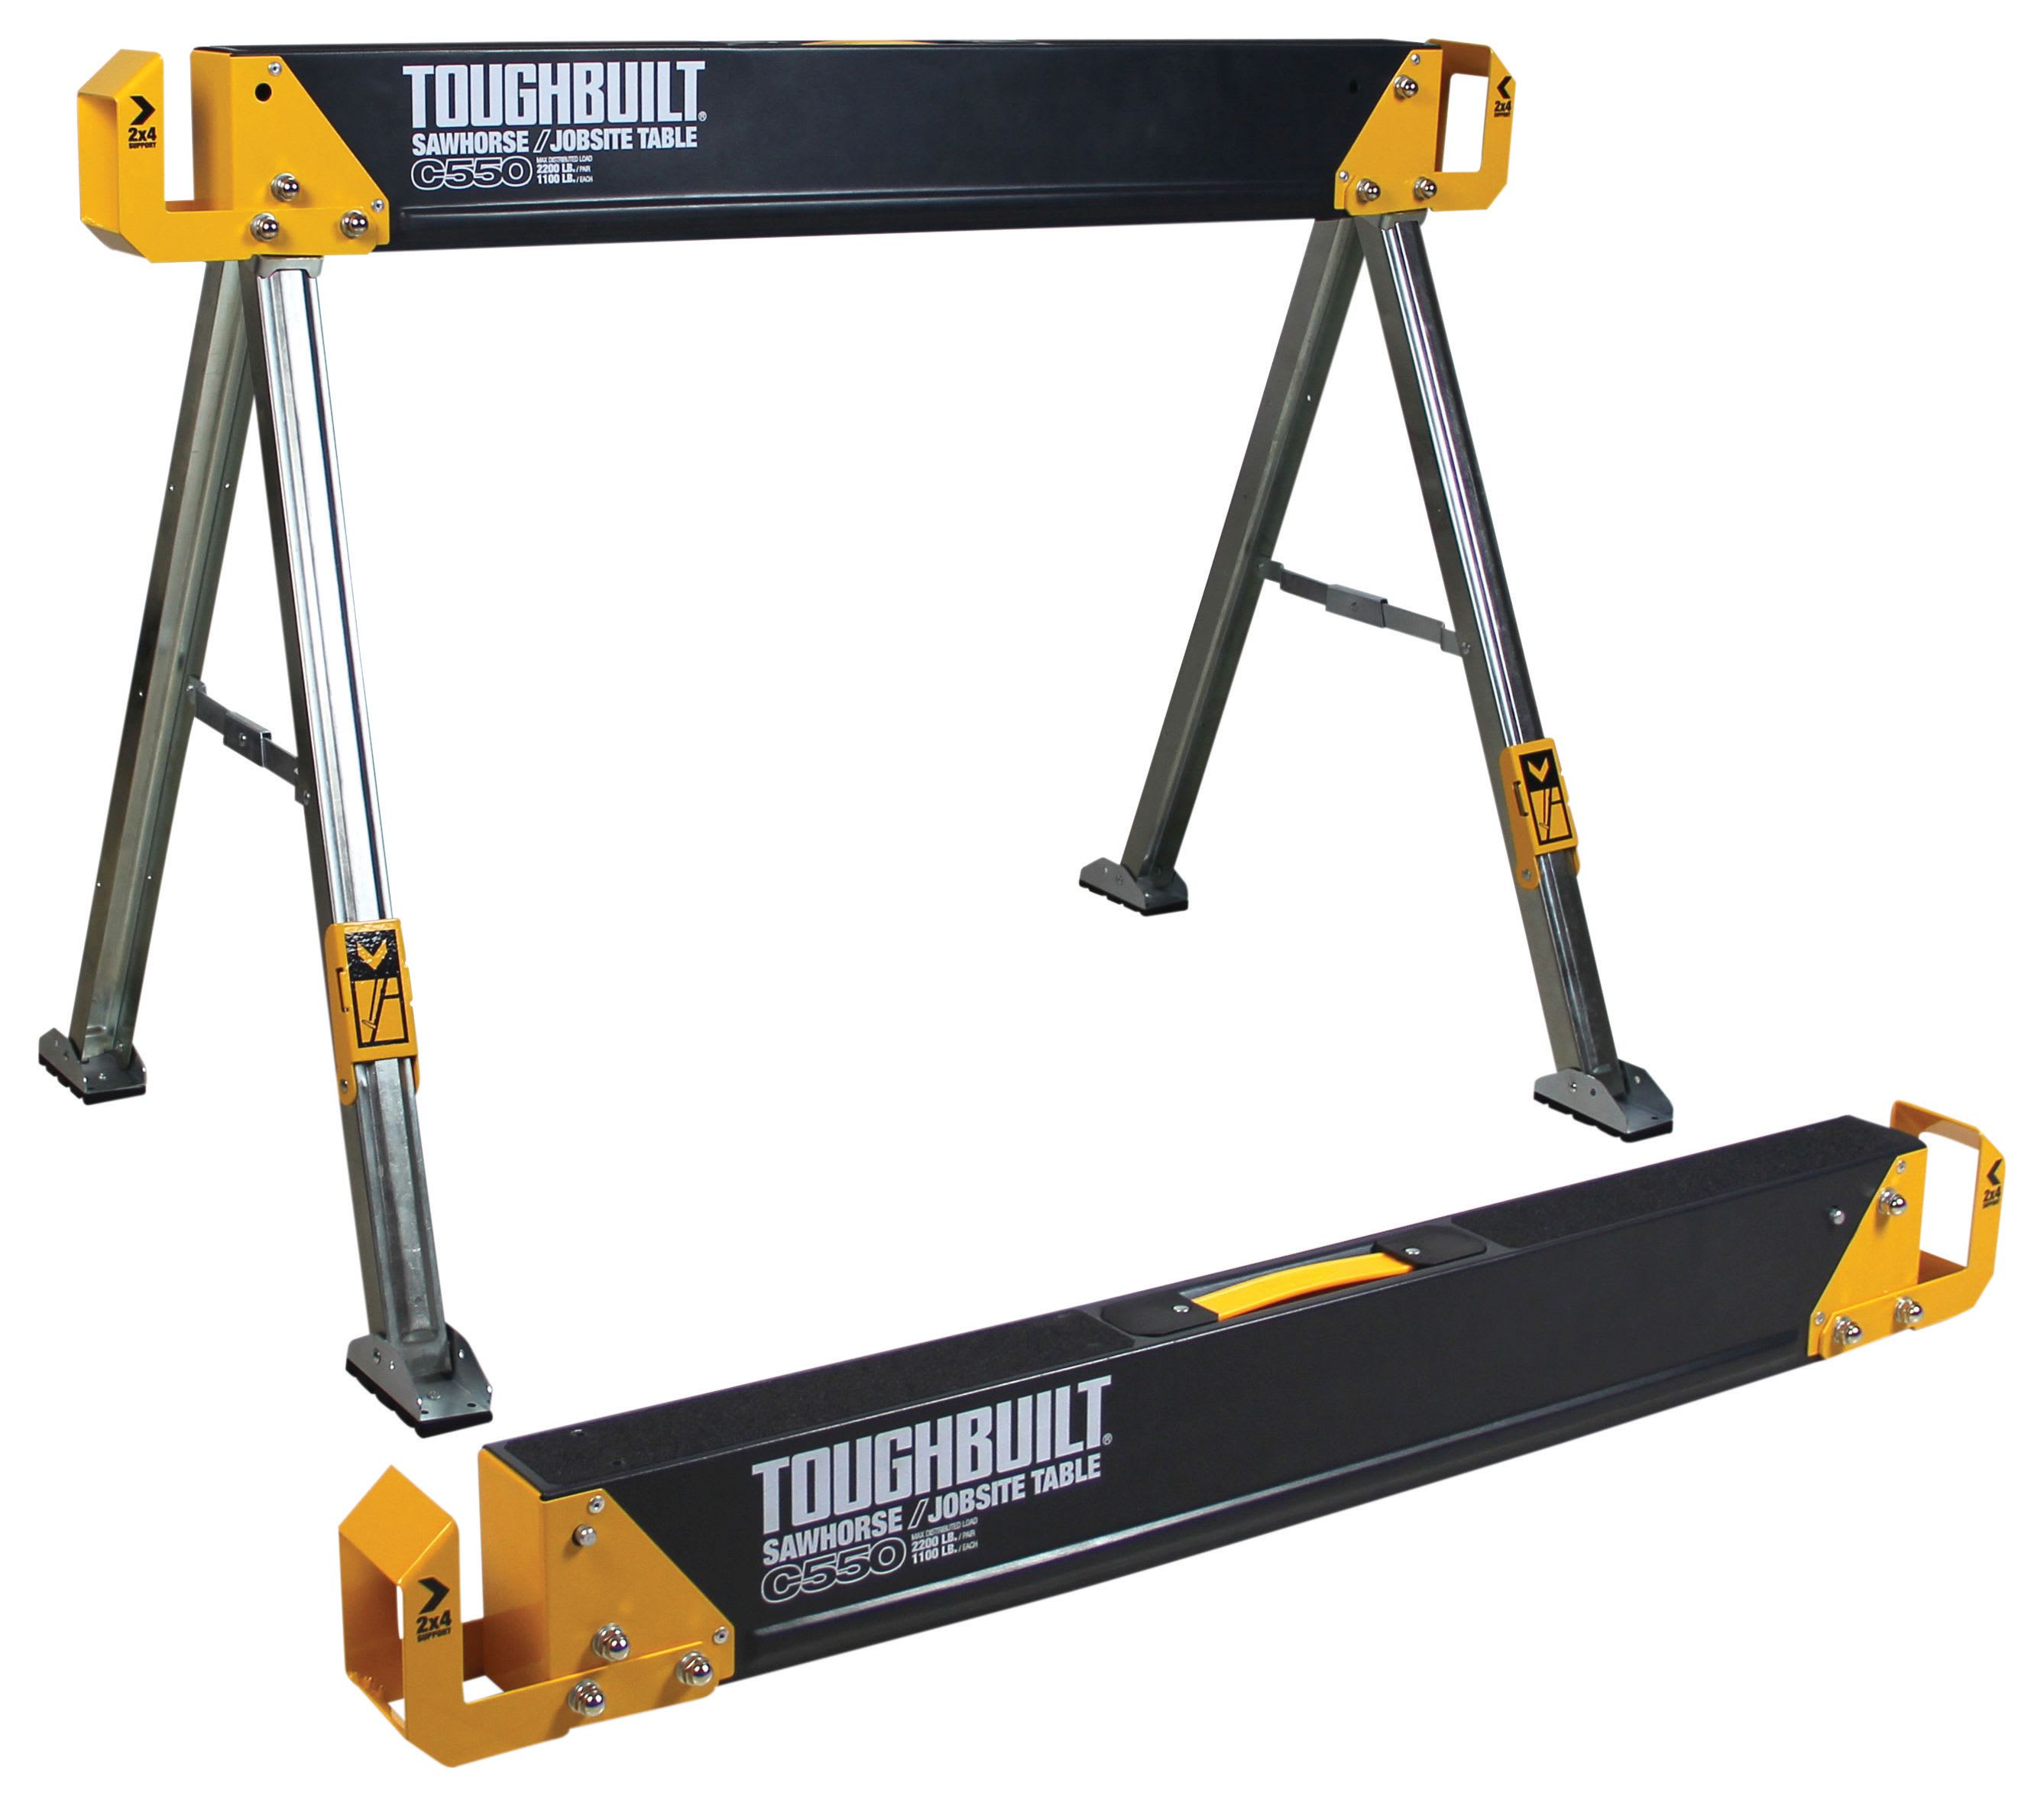 Toughbuilt C550-2 Saw Horse and Jobsite Table Twin